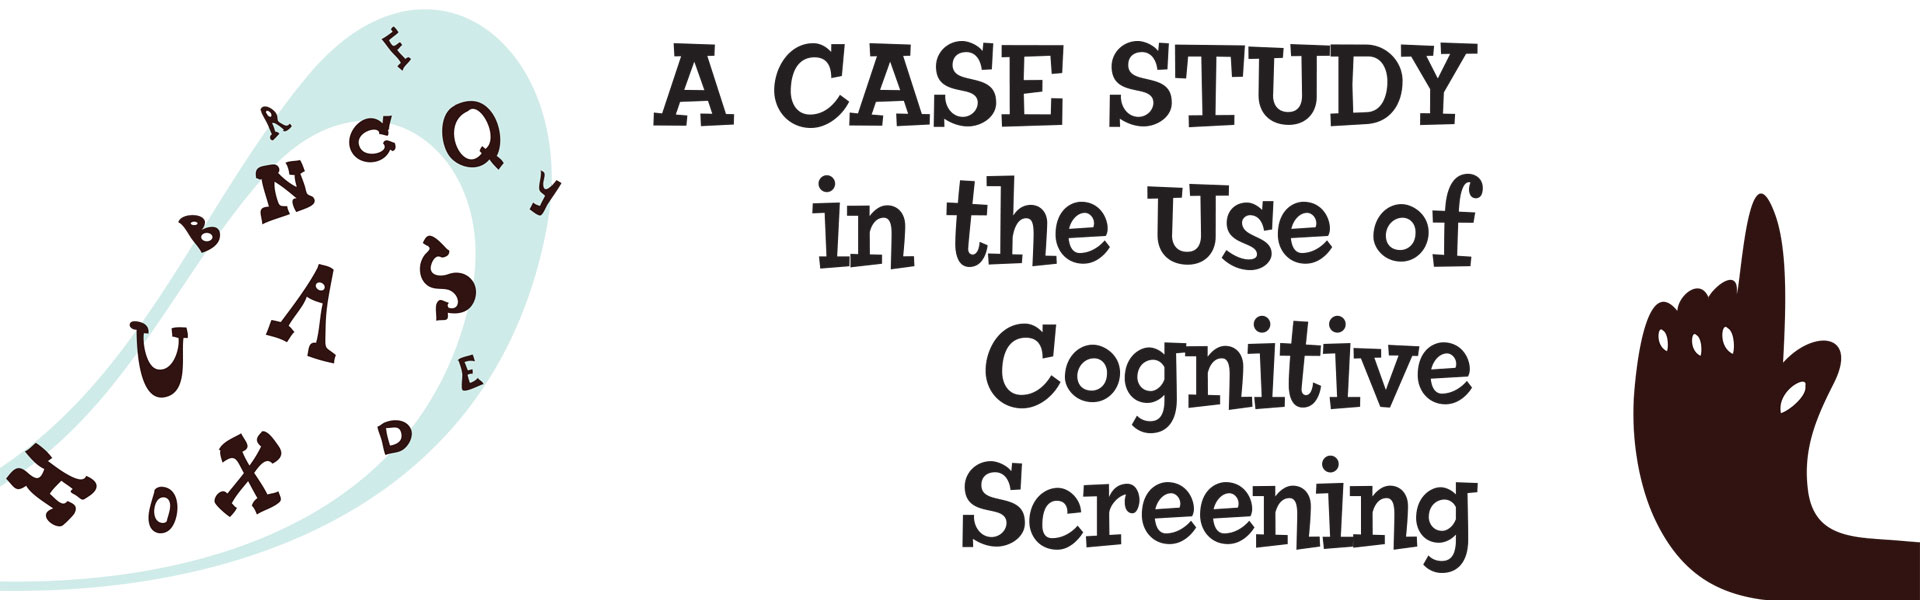 A Case Study in the Use of Cognitive Screening